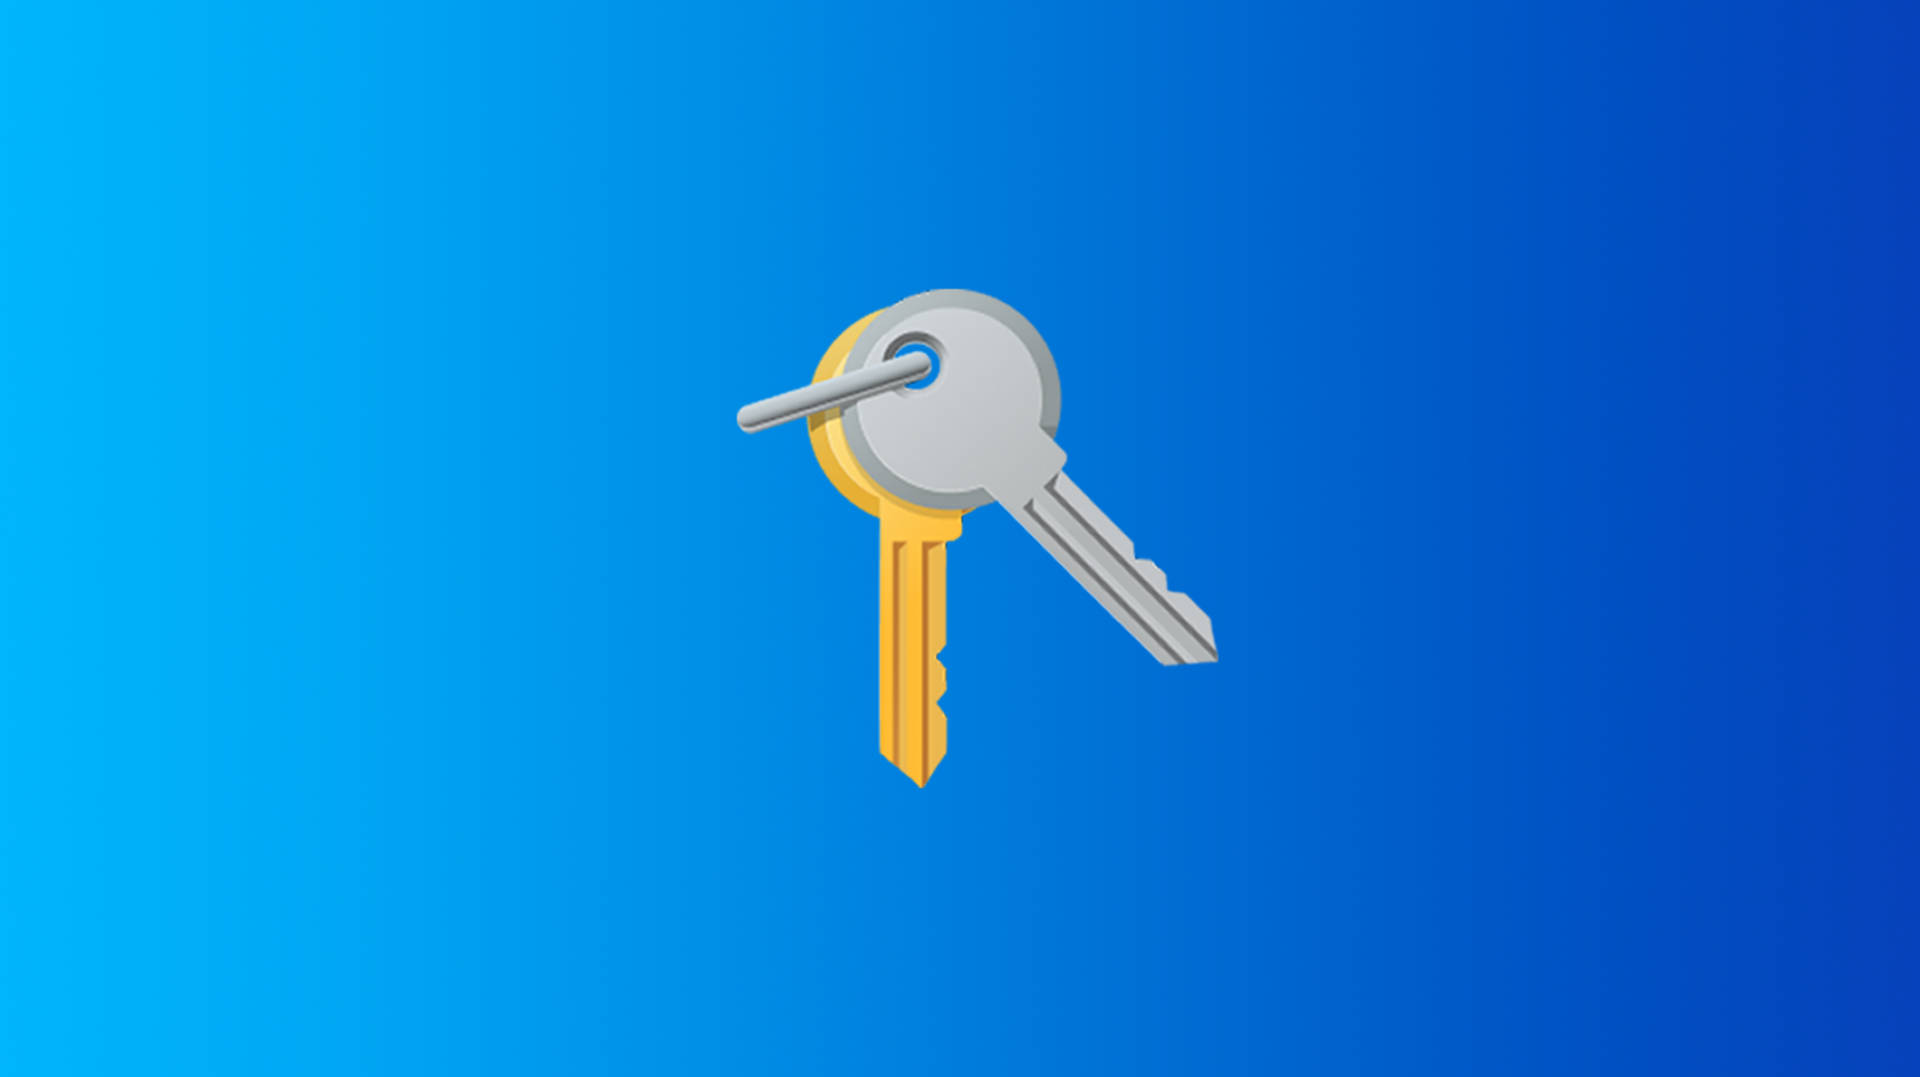 Gold And Silver Keys On Blue Surface Wallpaper